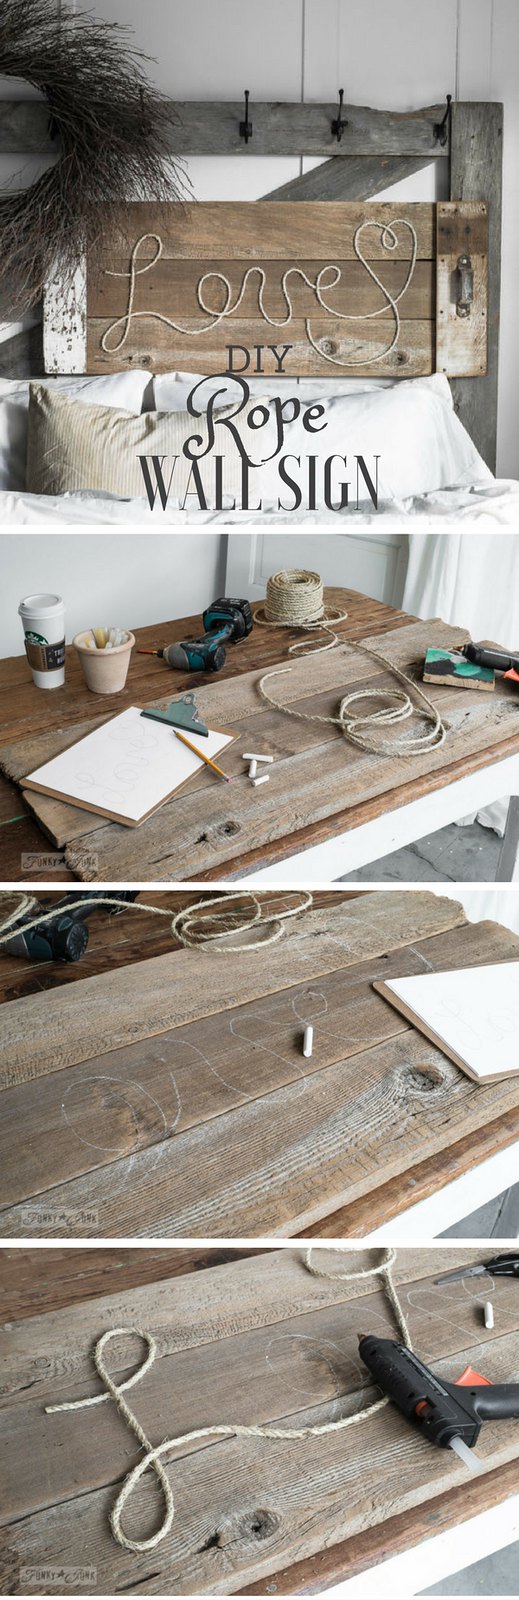 10 Ingenious DIY Decor Tricks You've Never Thought Of